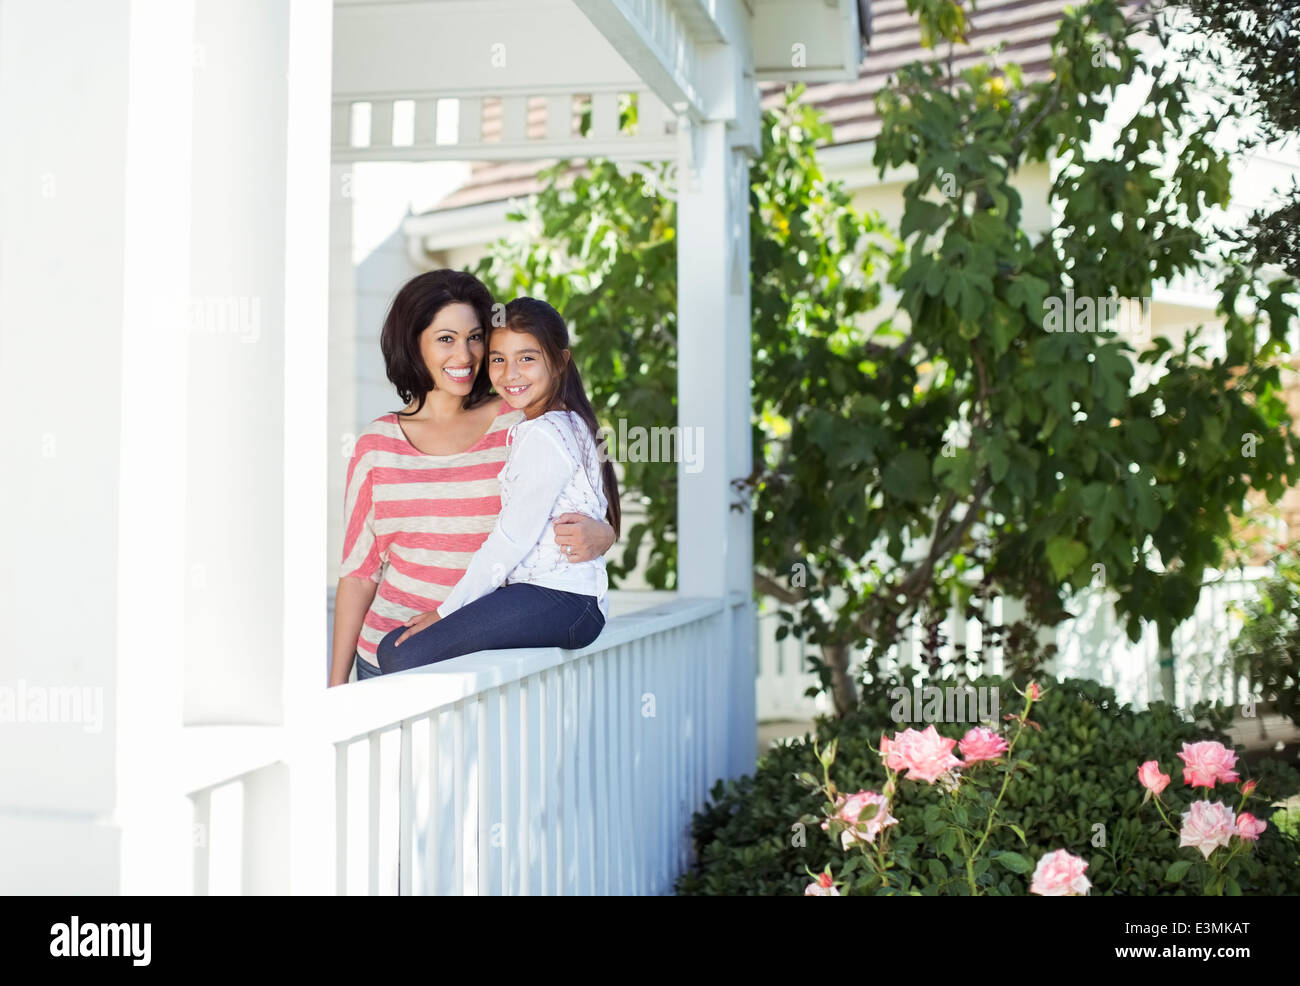 Portrait of smiling mother and daughter on porch Banque D'Images